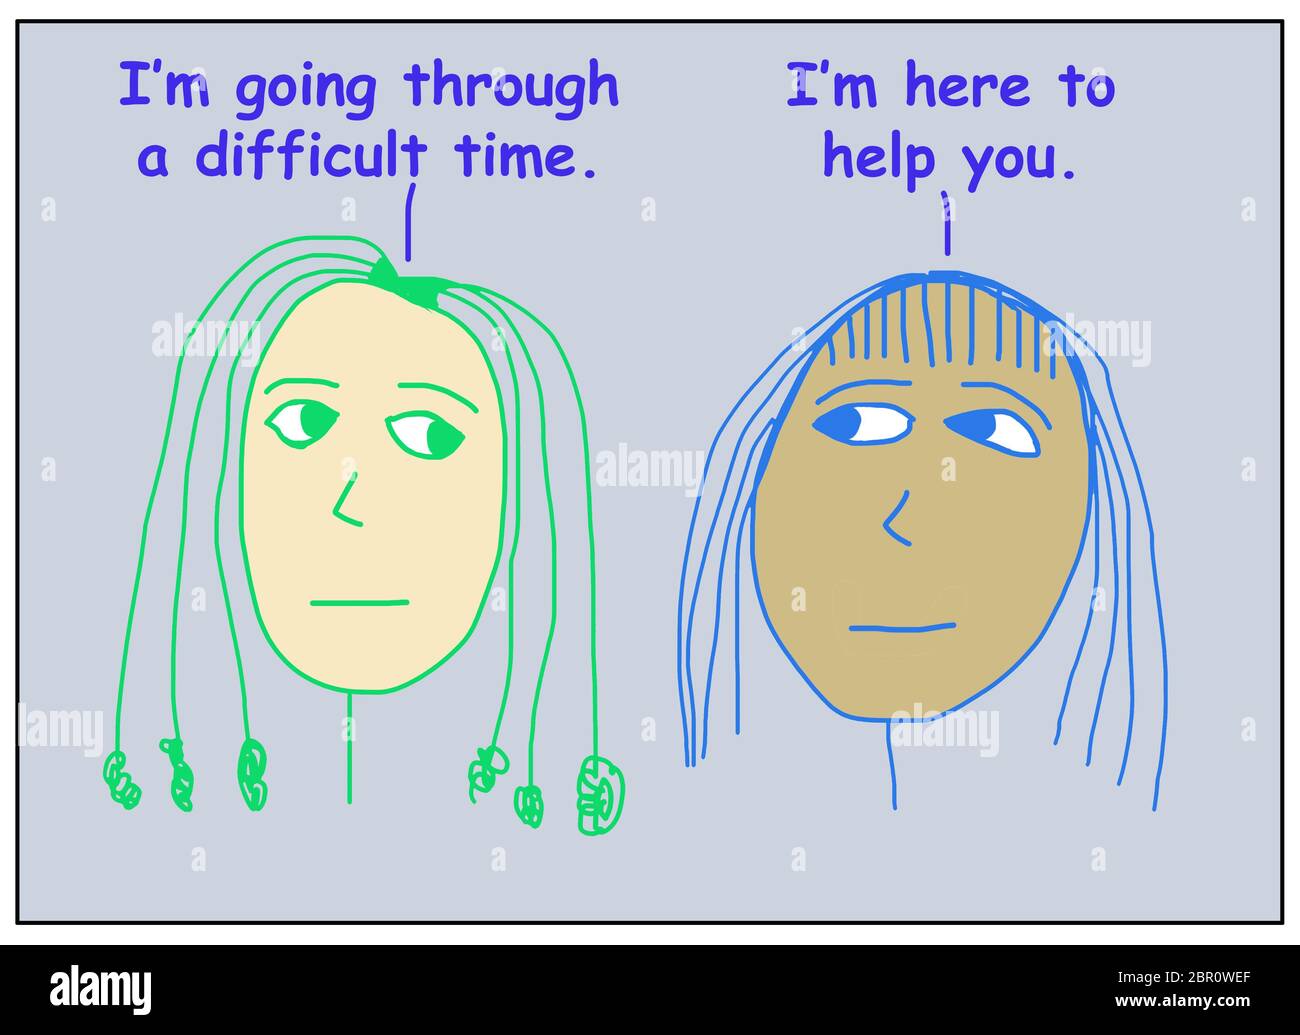 Color cartoon of two ethnically diverse women where one states she is going through a difficult time and the other says she is there to help her. Stock Photo